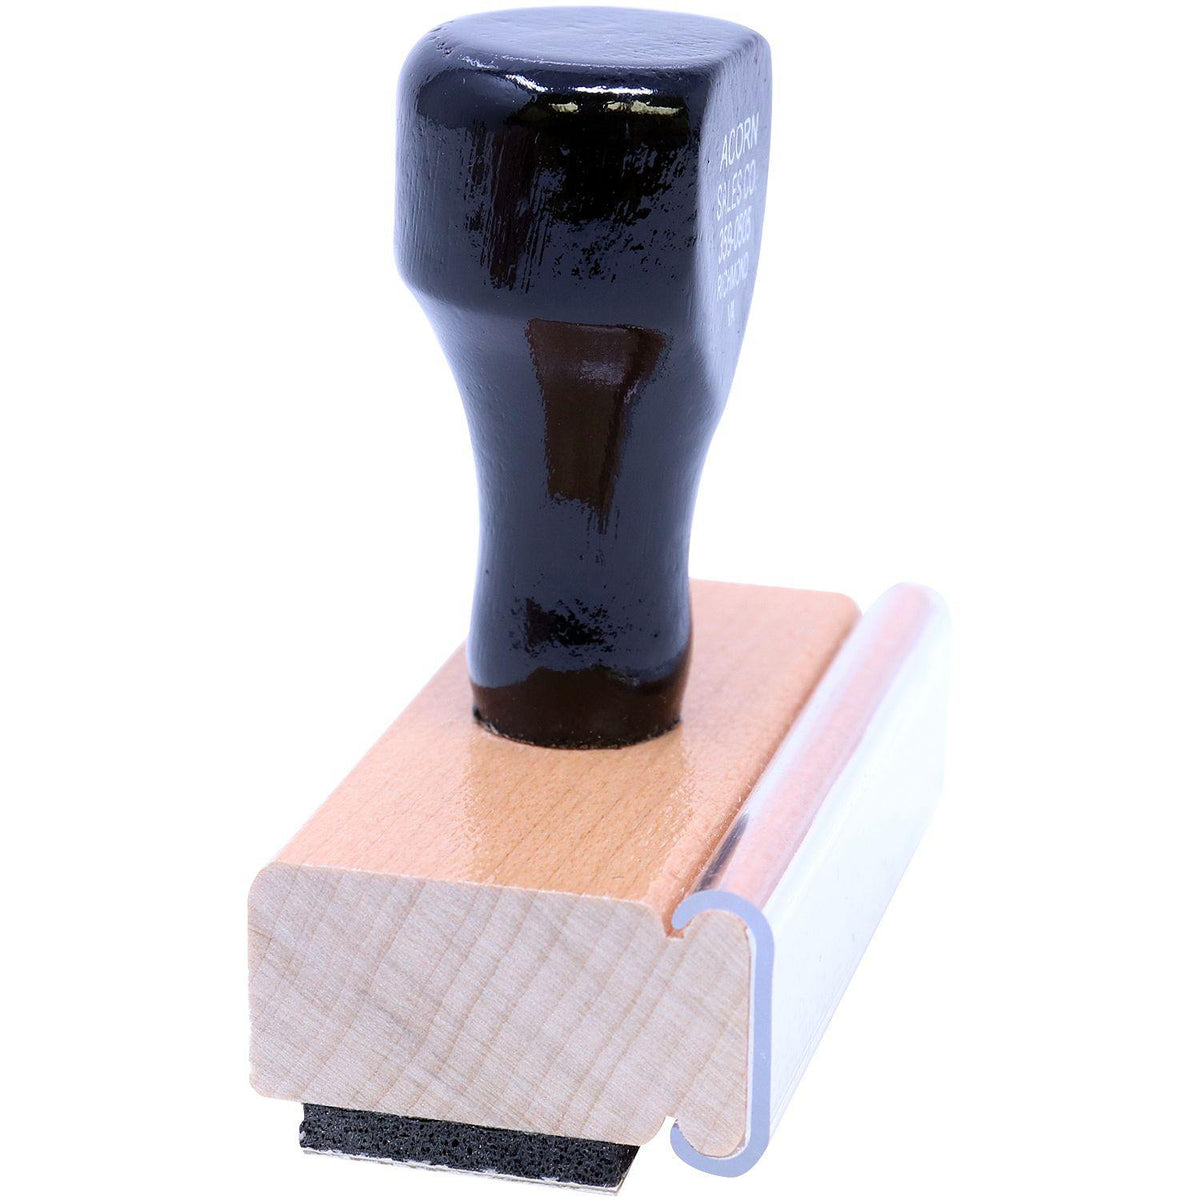 Perishable Rubber Stamp - Engineer Seal Stamps - Brand_Acorn, Impression Size_Small, Stamp Type_Regular Stamp, Type of Use_General, Type of Use_Postal &amp; Mailing